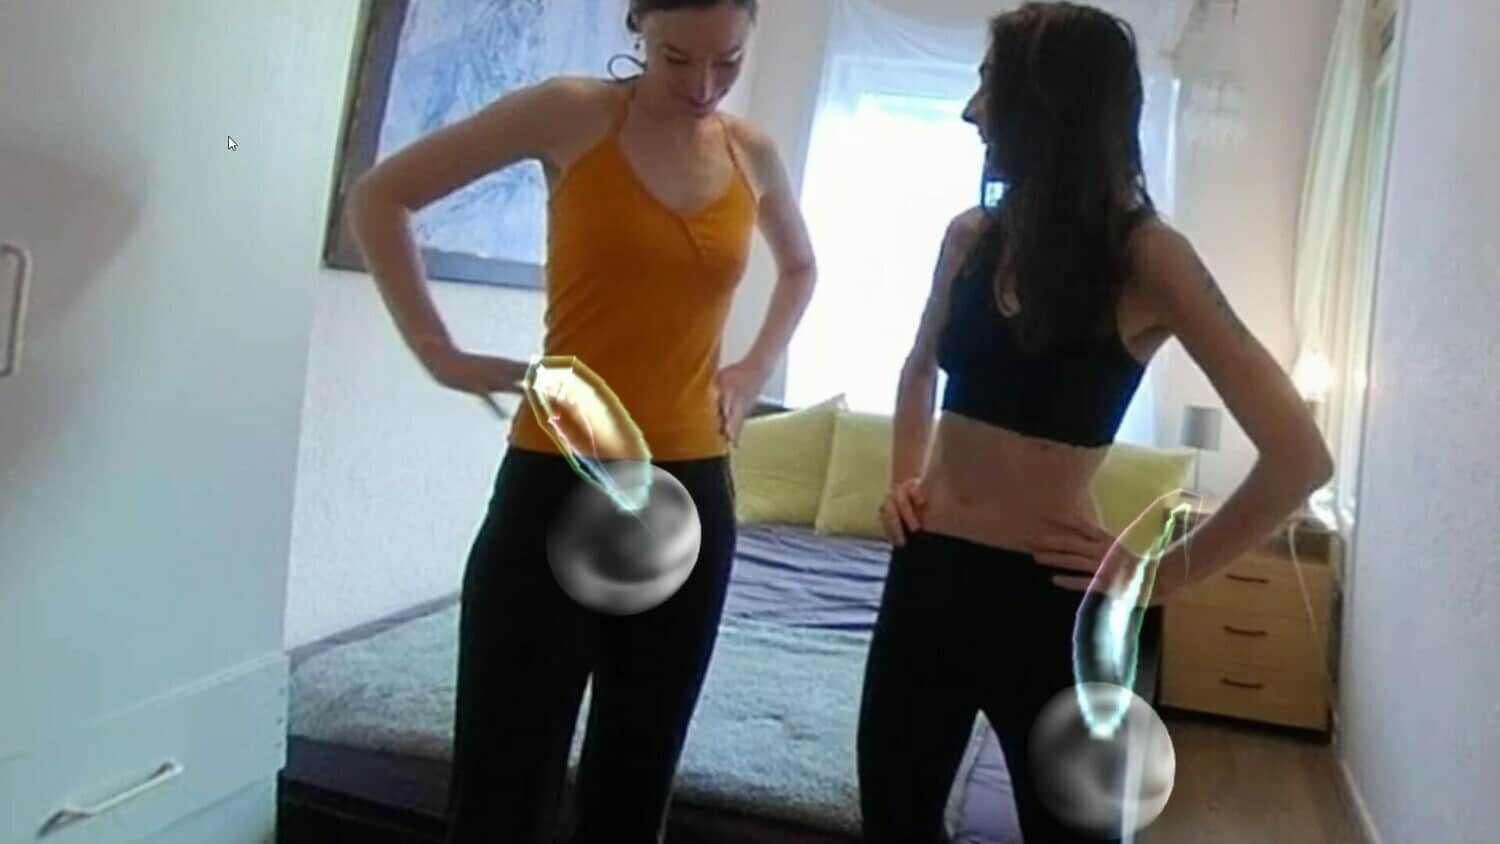 Two women engaging in XtraSexyReality experience in a room.